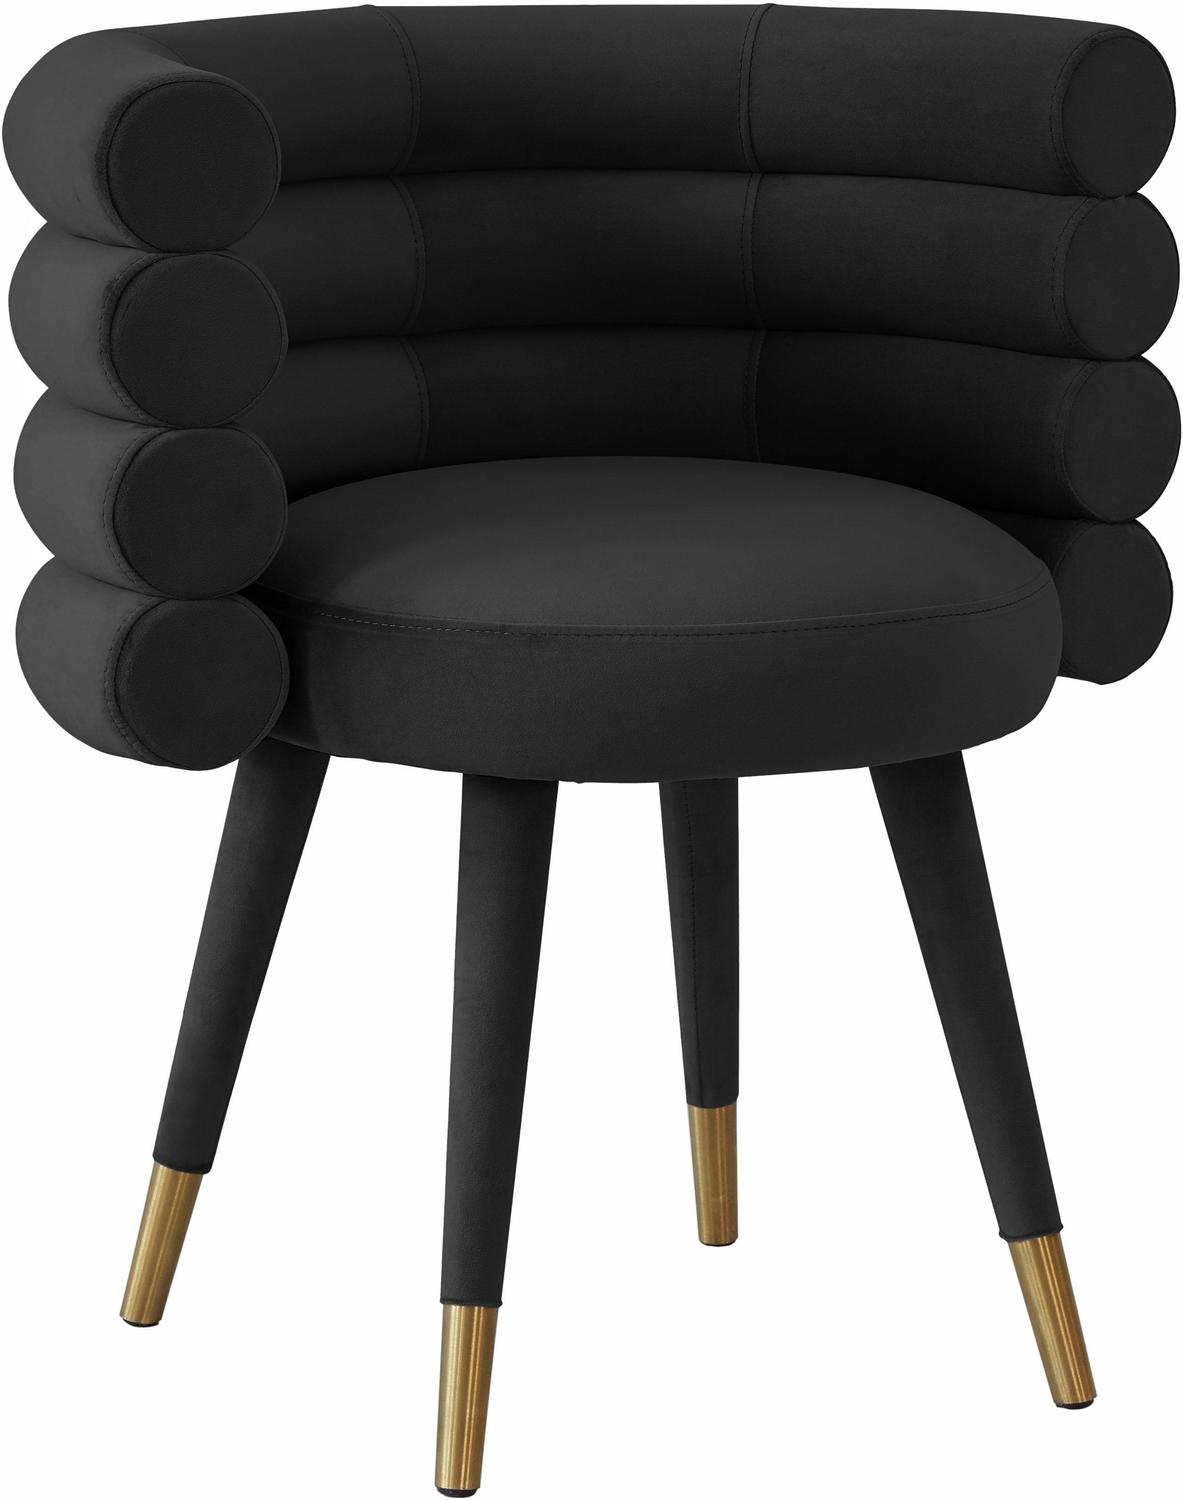  Tov Furniture Dining Chairs Dining Room Chairs Black